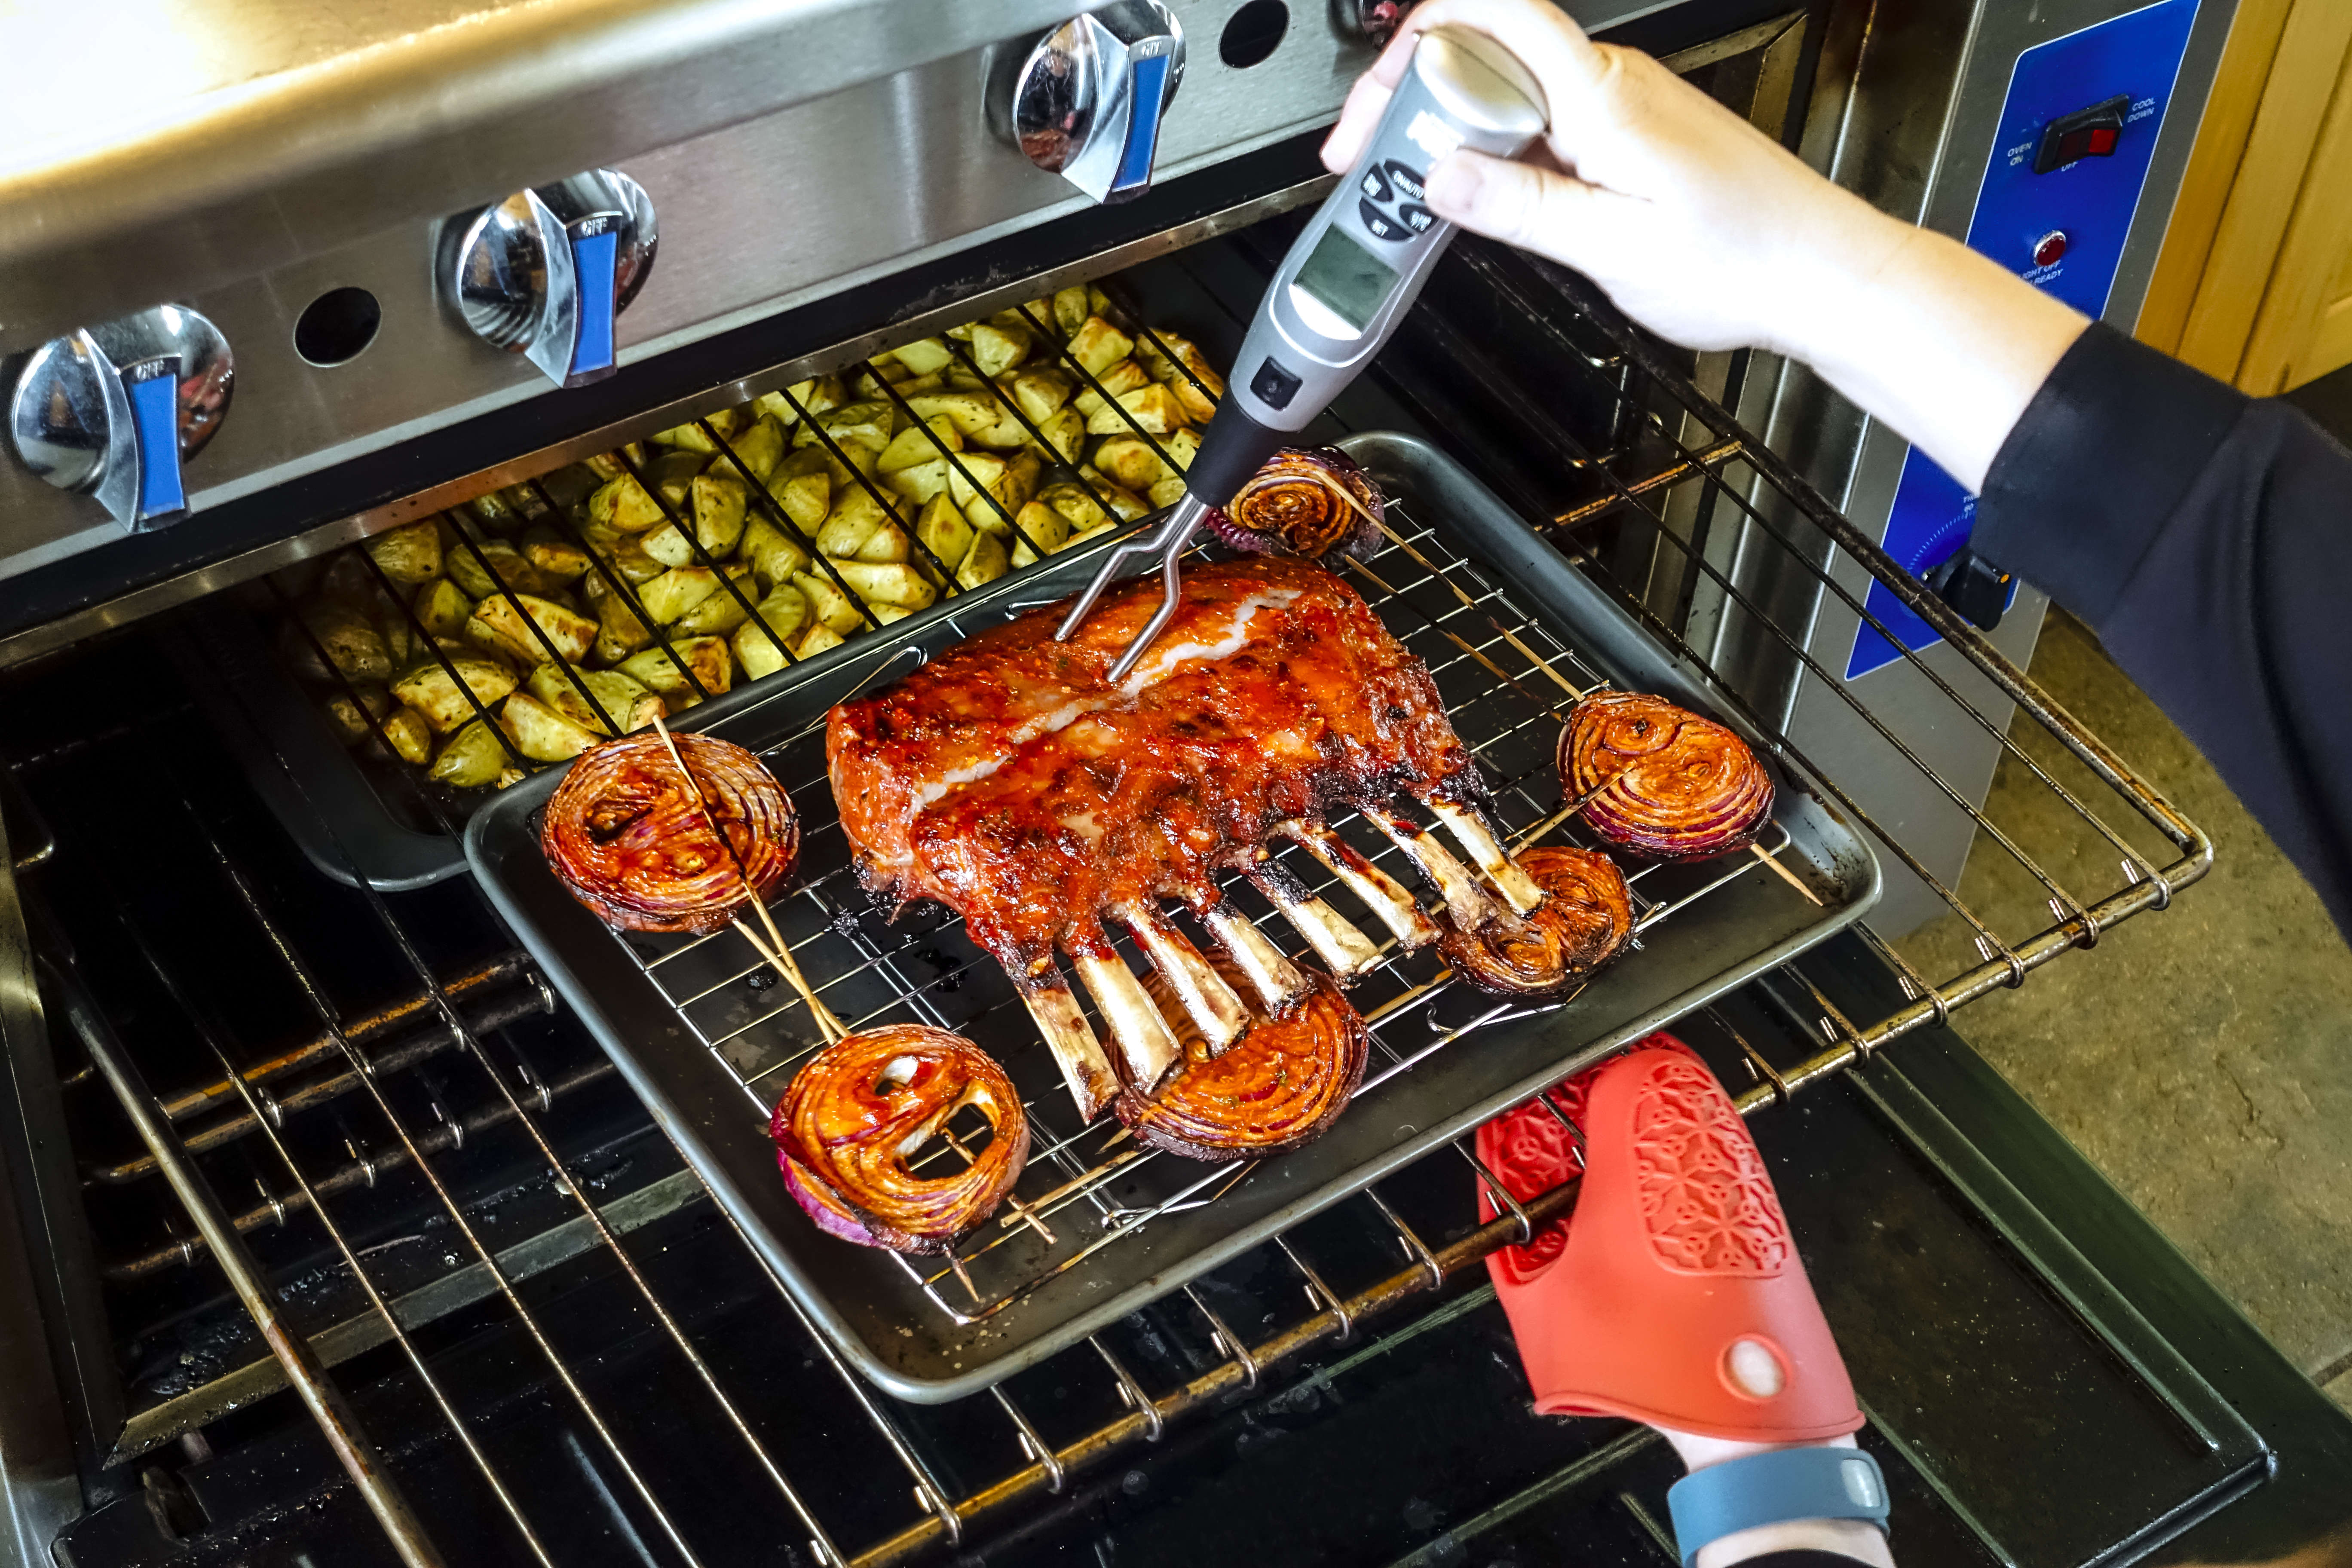 OXO Chef’s Precision Analog Leave-In Meat Thermometer